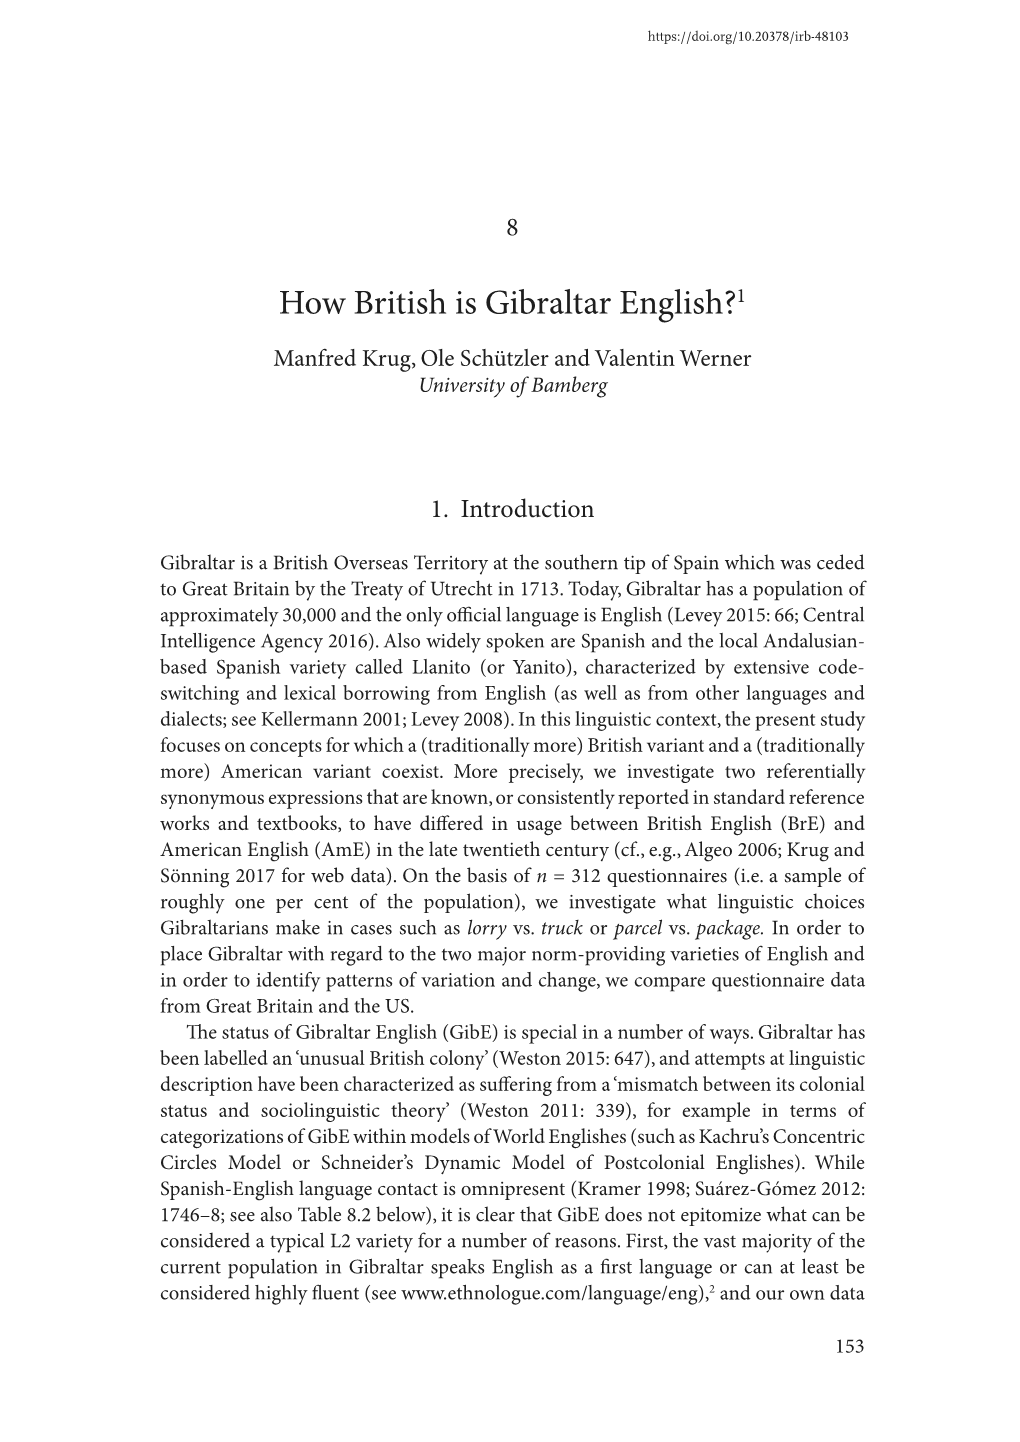 How British Is Gibraltar English? 155 More Detail)